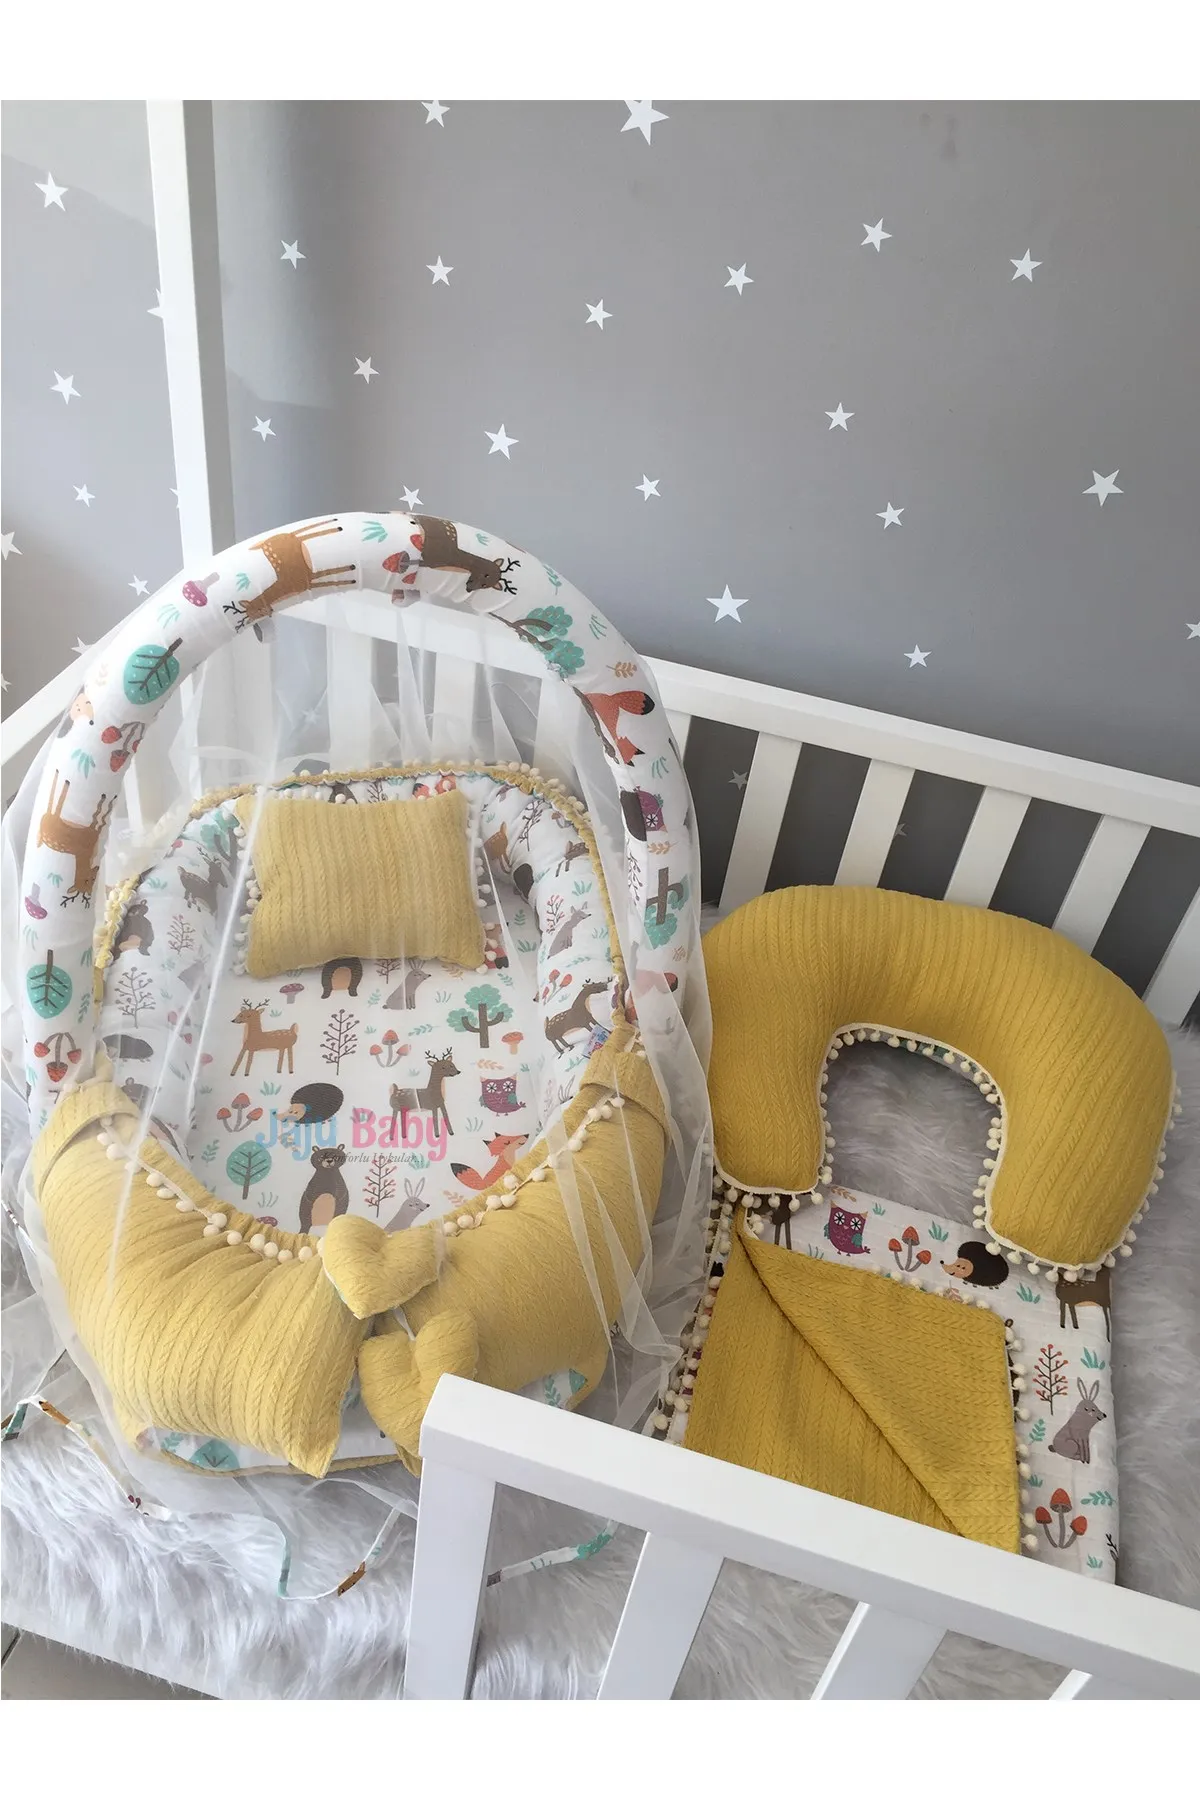 Jaju Baby Handmade Yellow Knit Pique Fabric and Forest Muslin Fabric 6 Piece Babynest Set with Pompom Mother Side Portable Bed